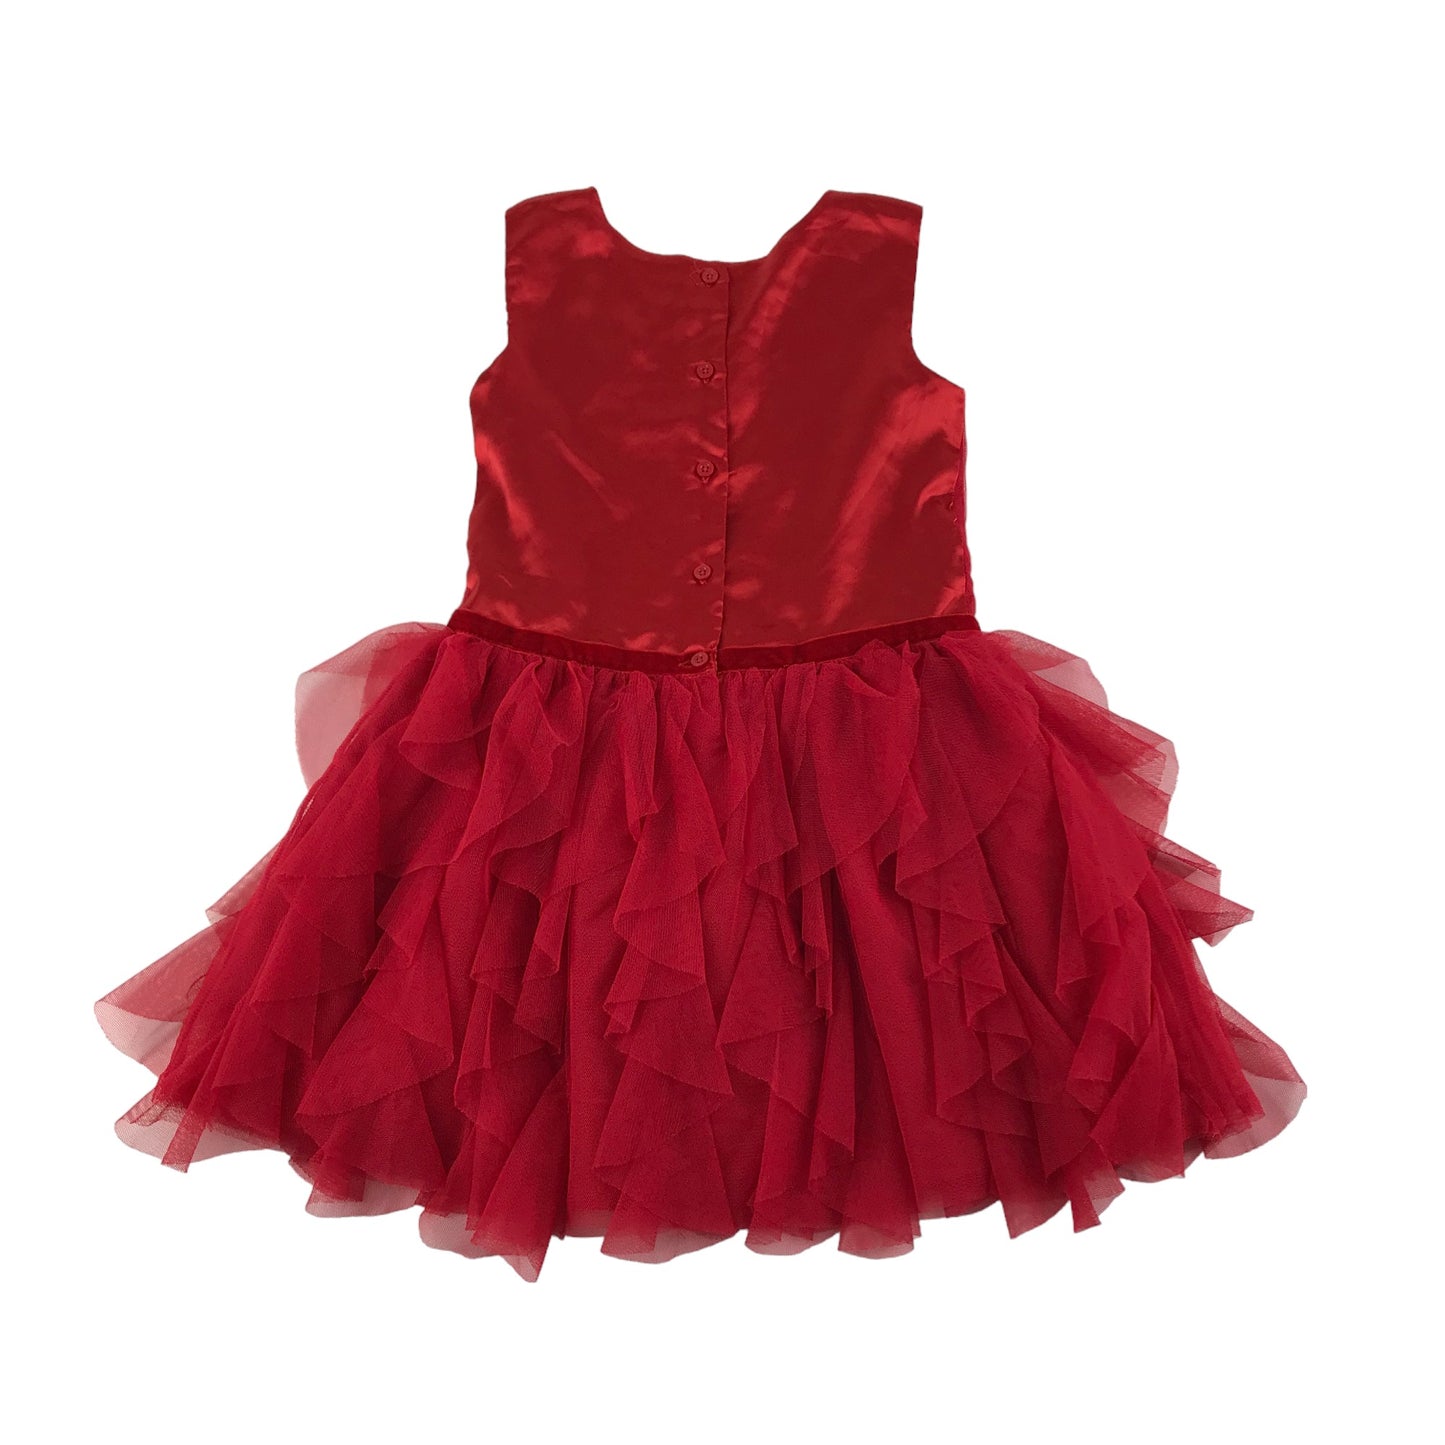 George Dress Age 5 Red Sparkly Sequin Top with Frilled Tulle Skirt